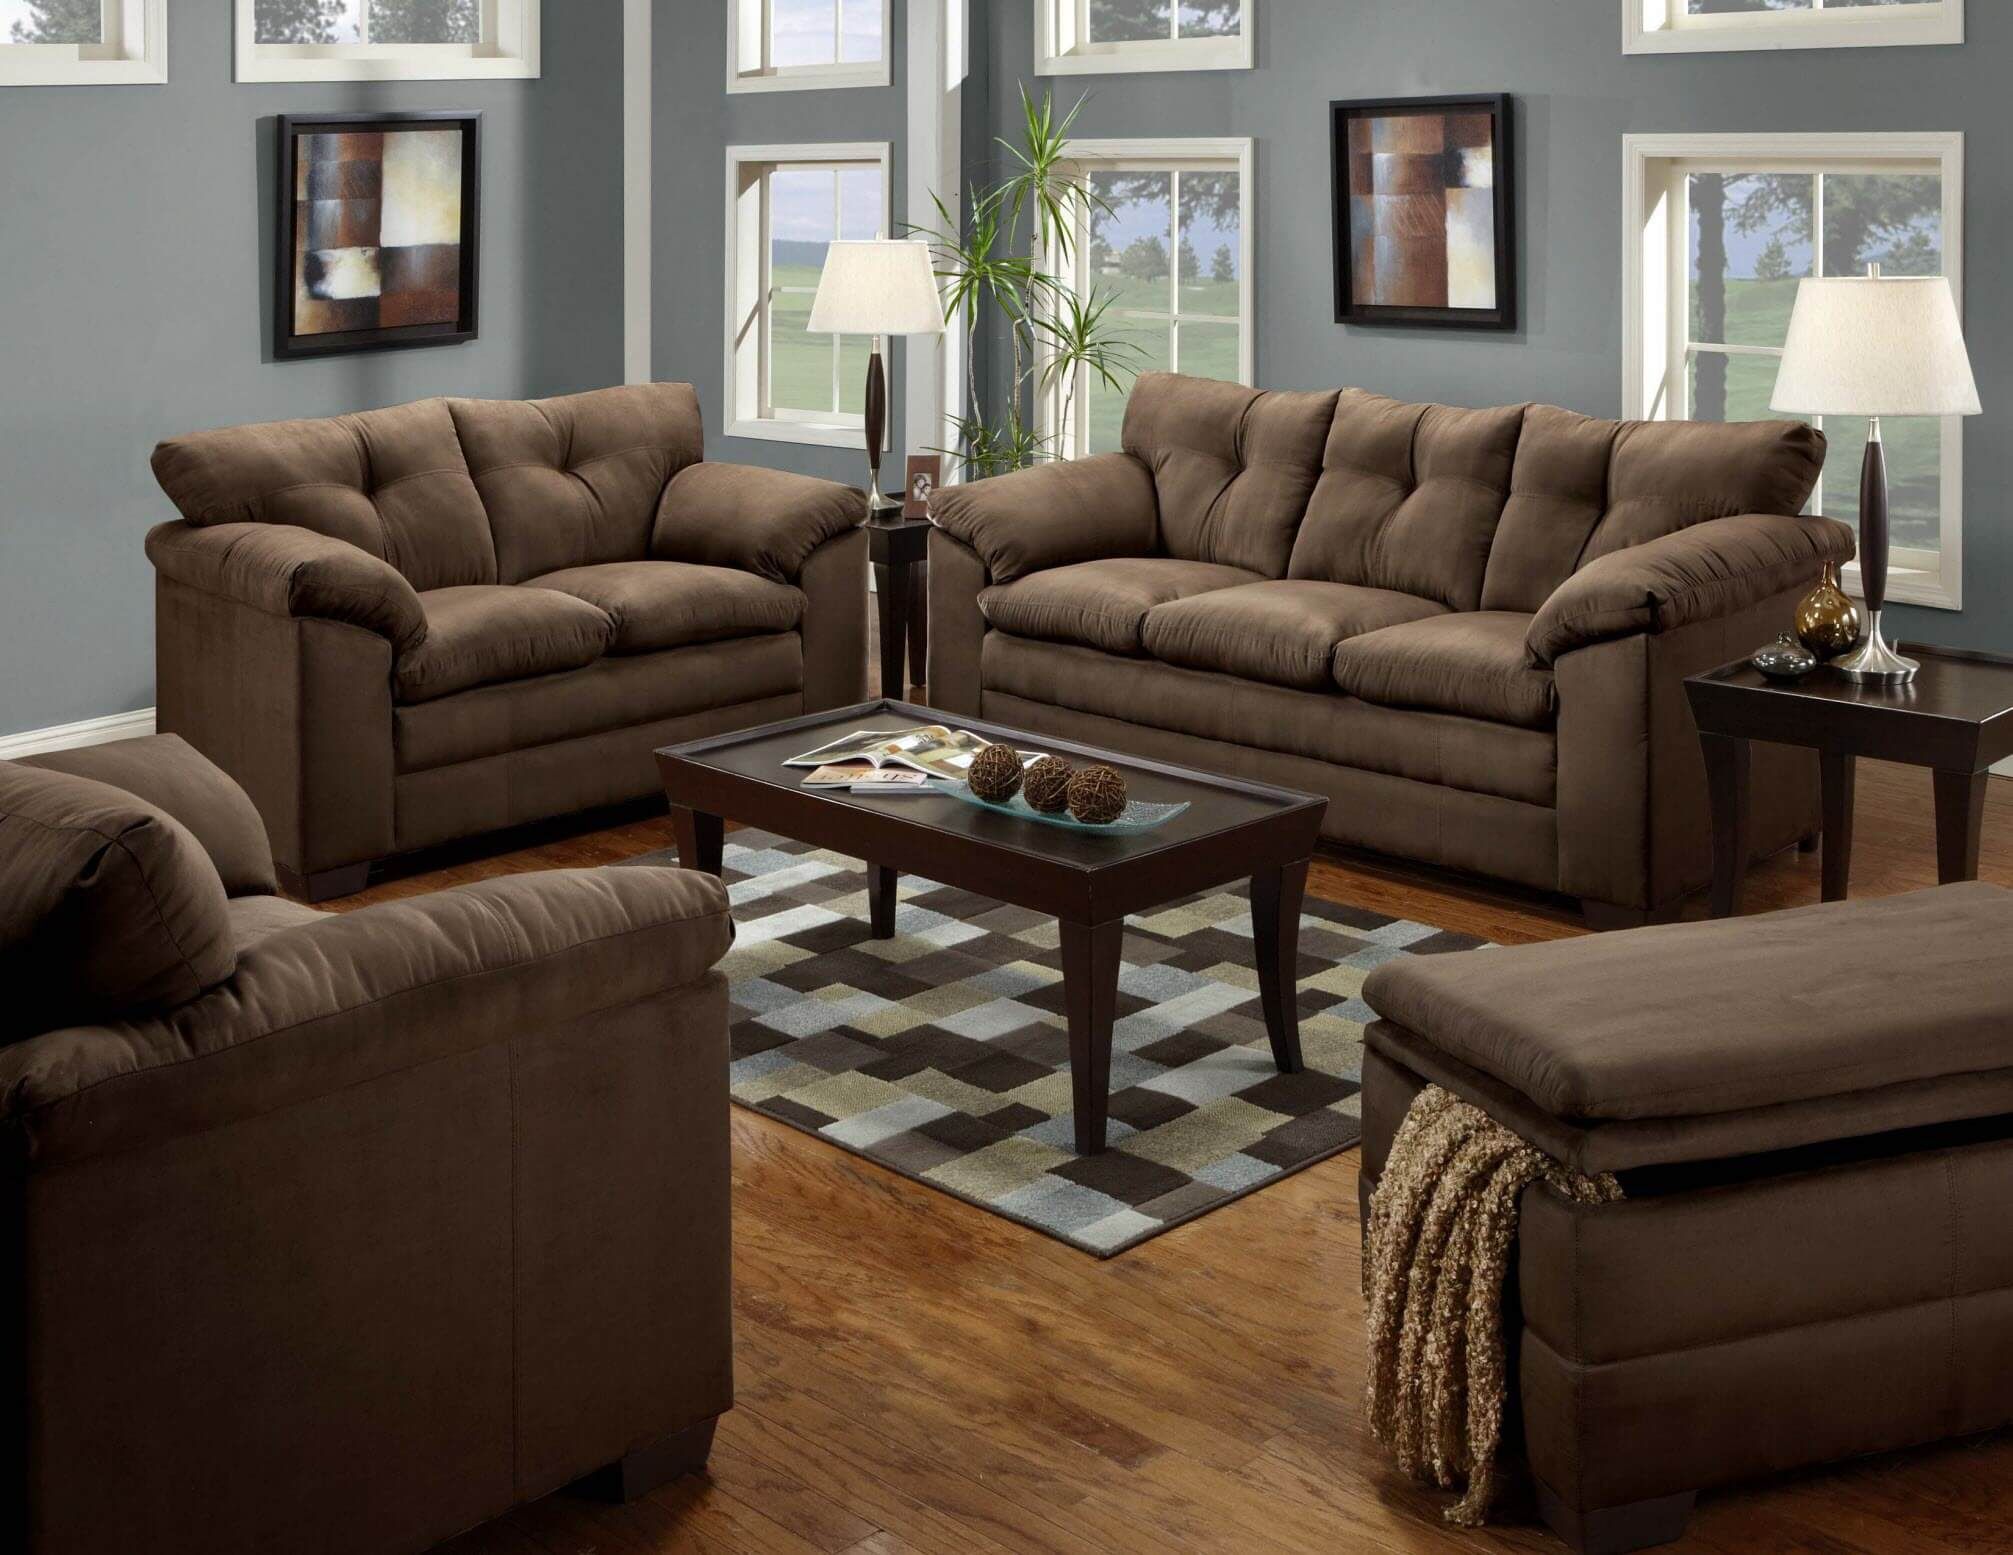 Bulldozer Chocolate Sofa And Loveseat | Fabric Living Room Within Cocoa Console Tables (View 15 of 20)